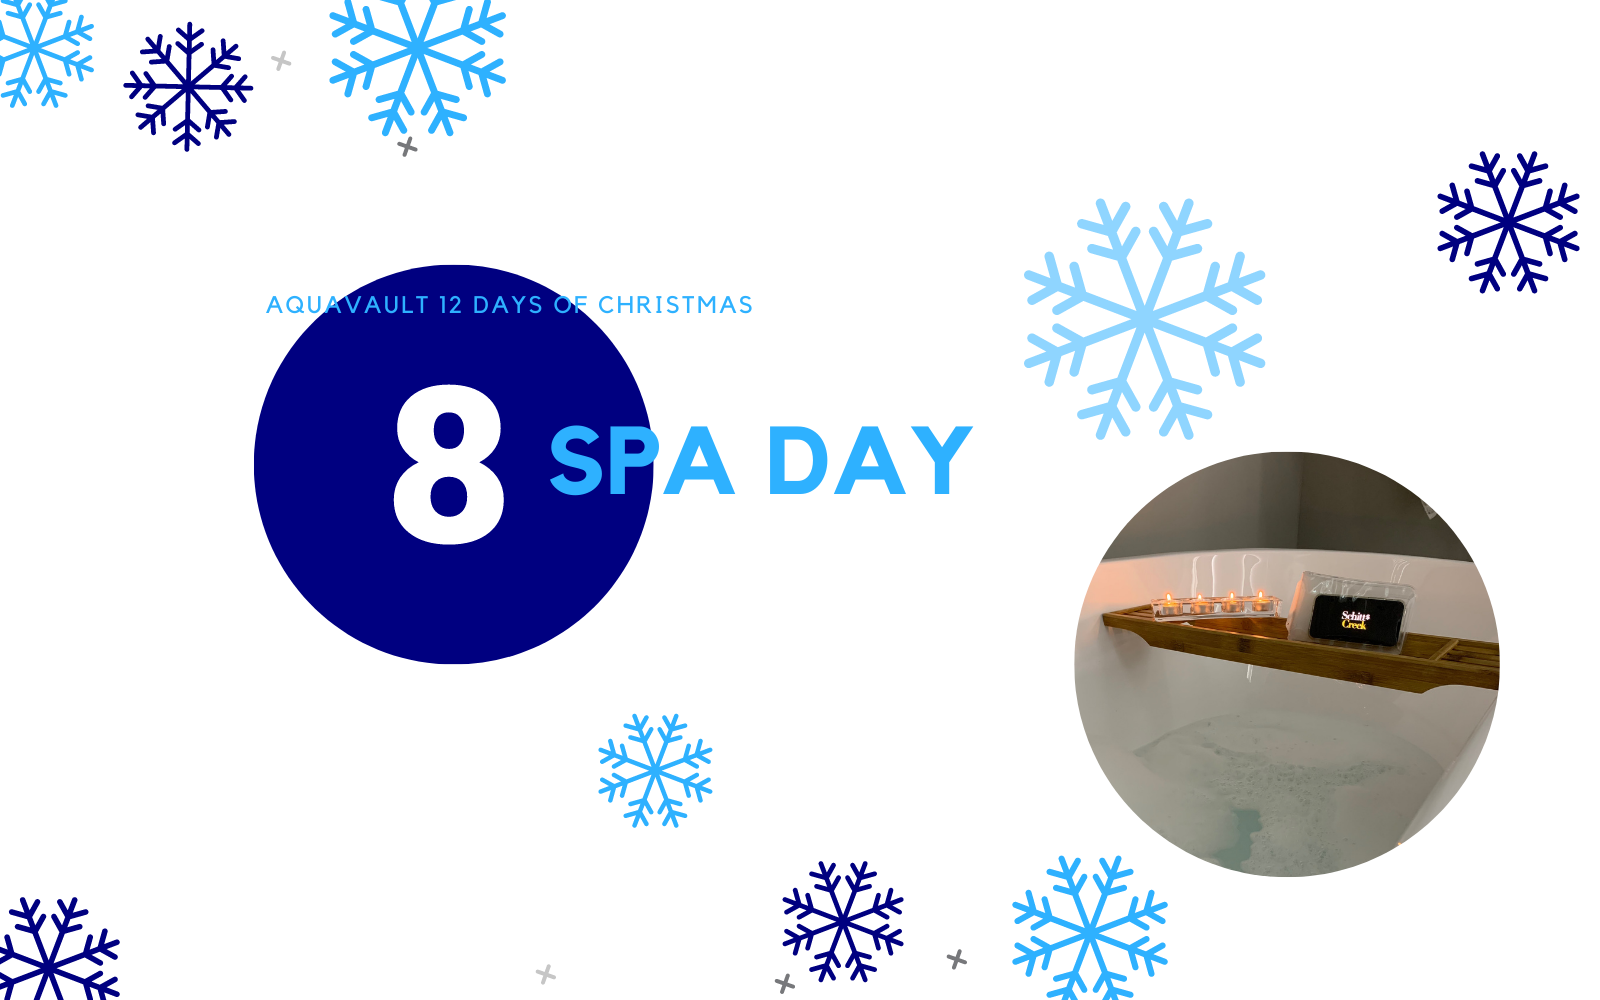 AquaVault 12 Days of Christmas - Day 8: Spa Day